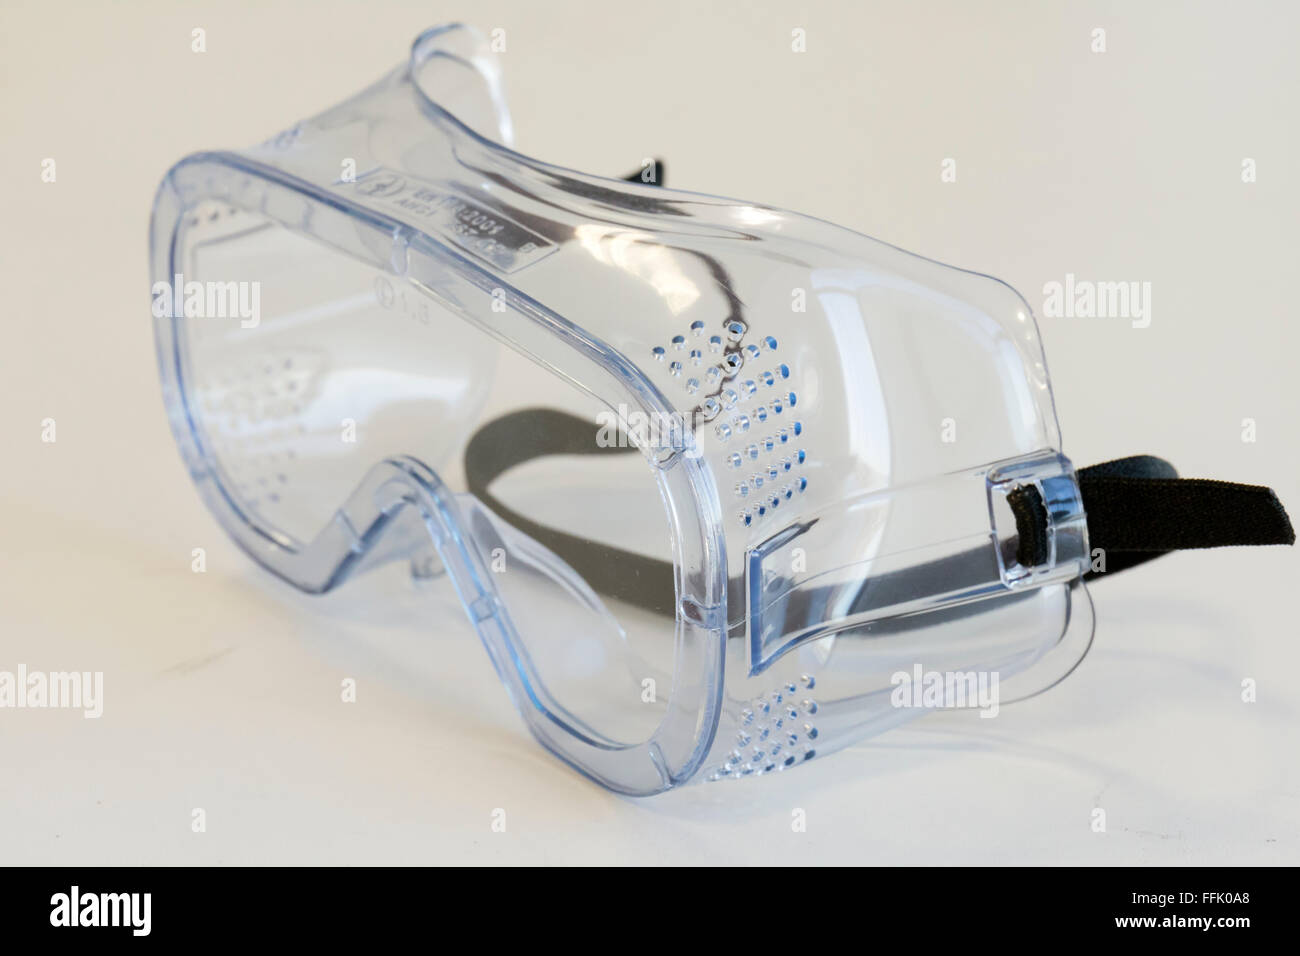 plastic safety goggles on white background Stock Photo